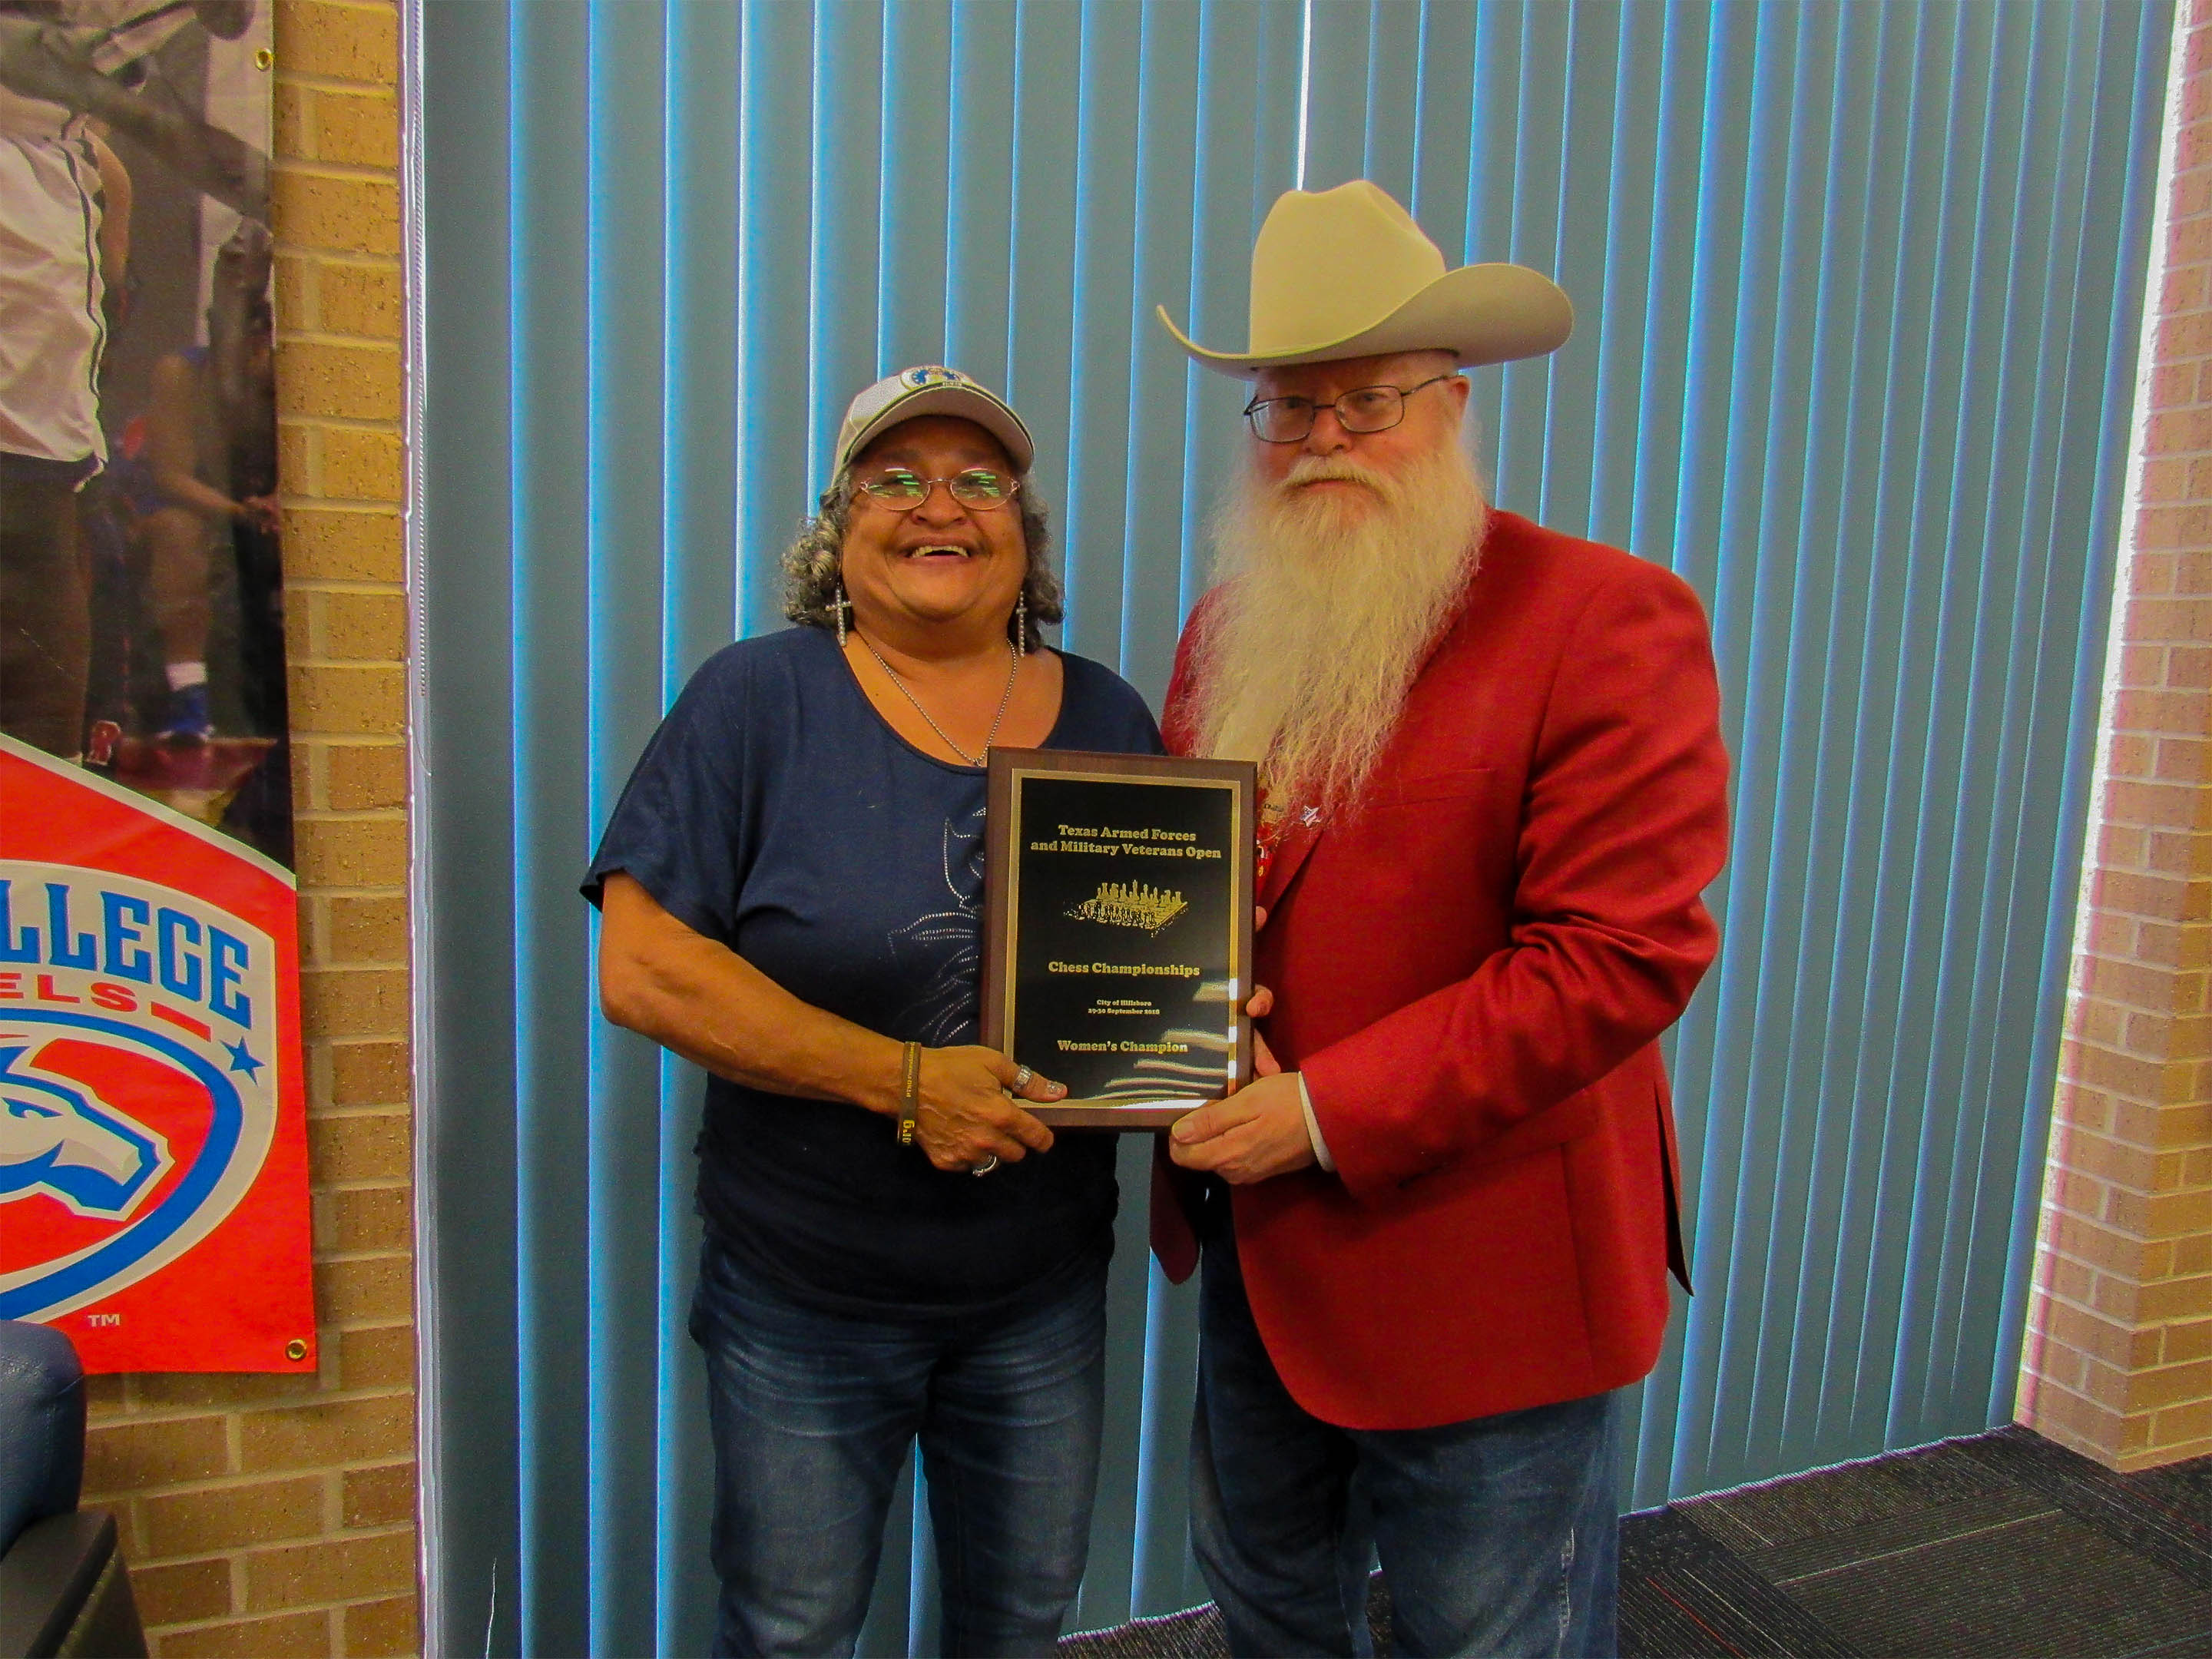 Air Force/Marines Retiree Clarese Roberts (left in the photo) was crowned Texas Armed Forces Women’s Champion by Jim Hollingsworth (right), Chief Organizer.  Photo by Sheryl McBroom.